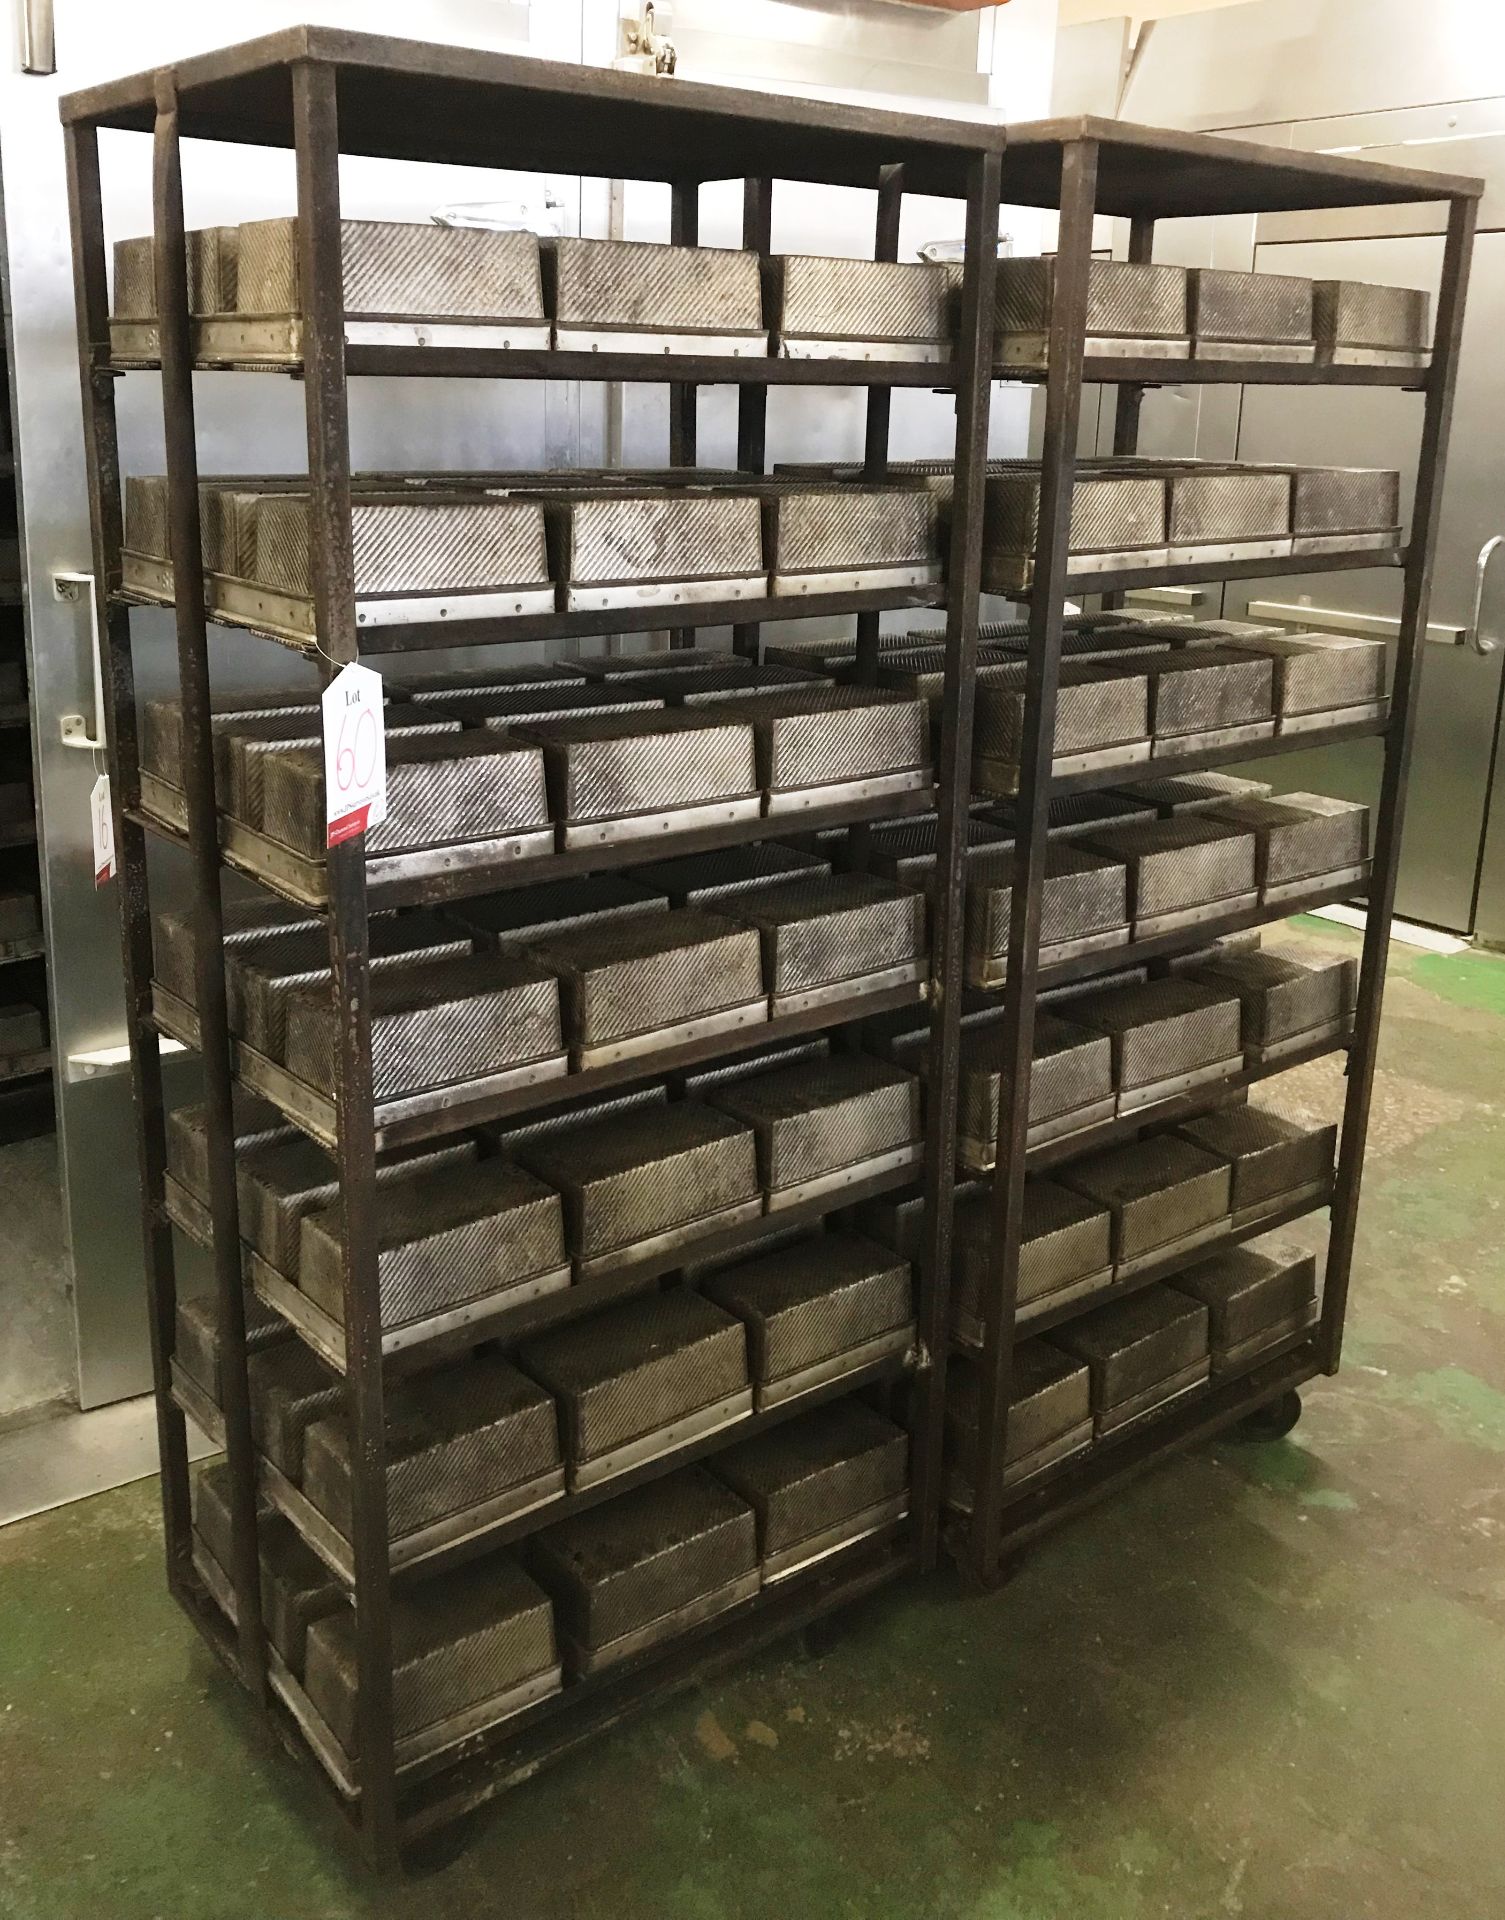 16 x 7 Level Bakery Racks w/ 3 Loaf Baking Tins - Approx 300+ Tins - Image 5 of 5